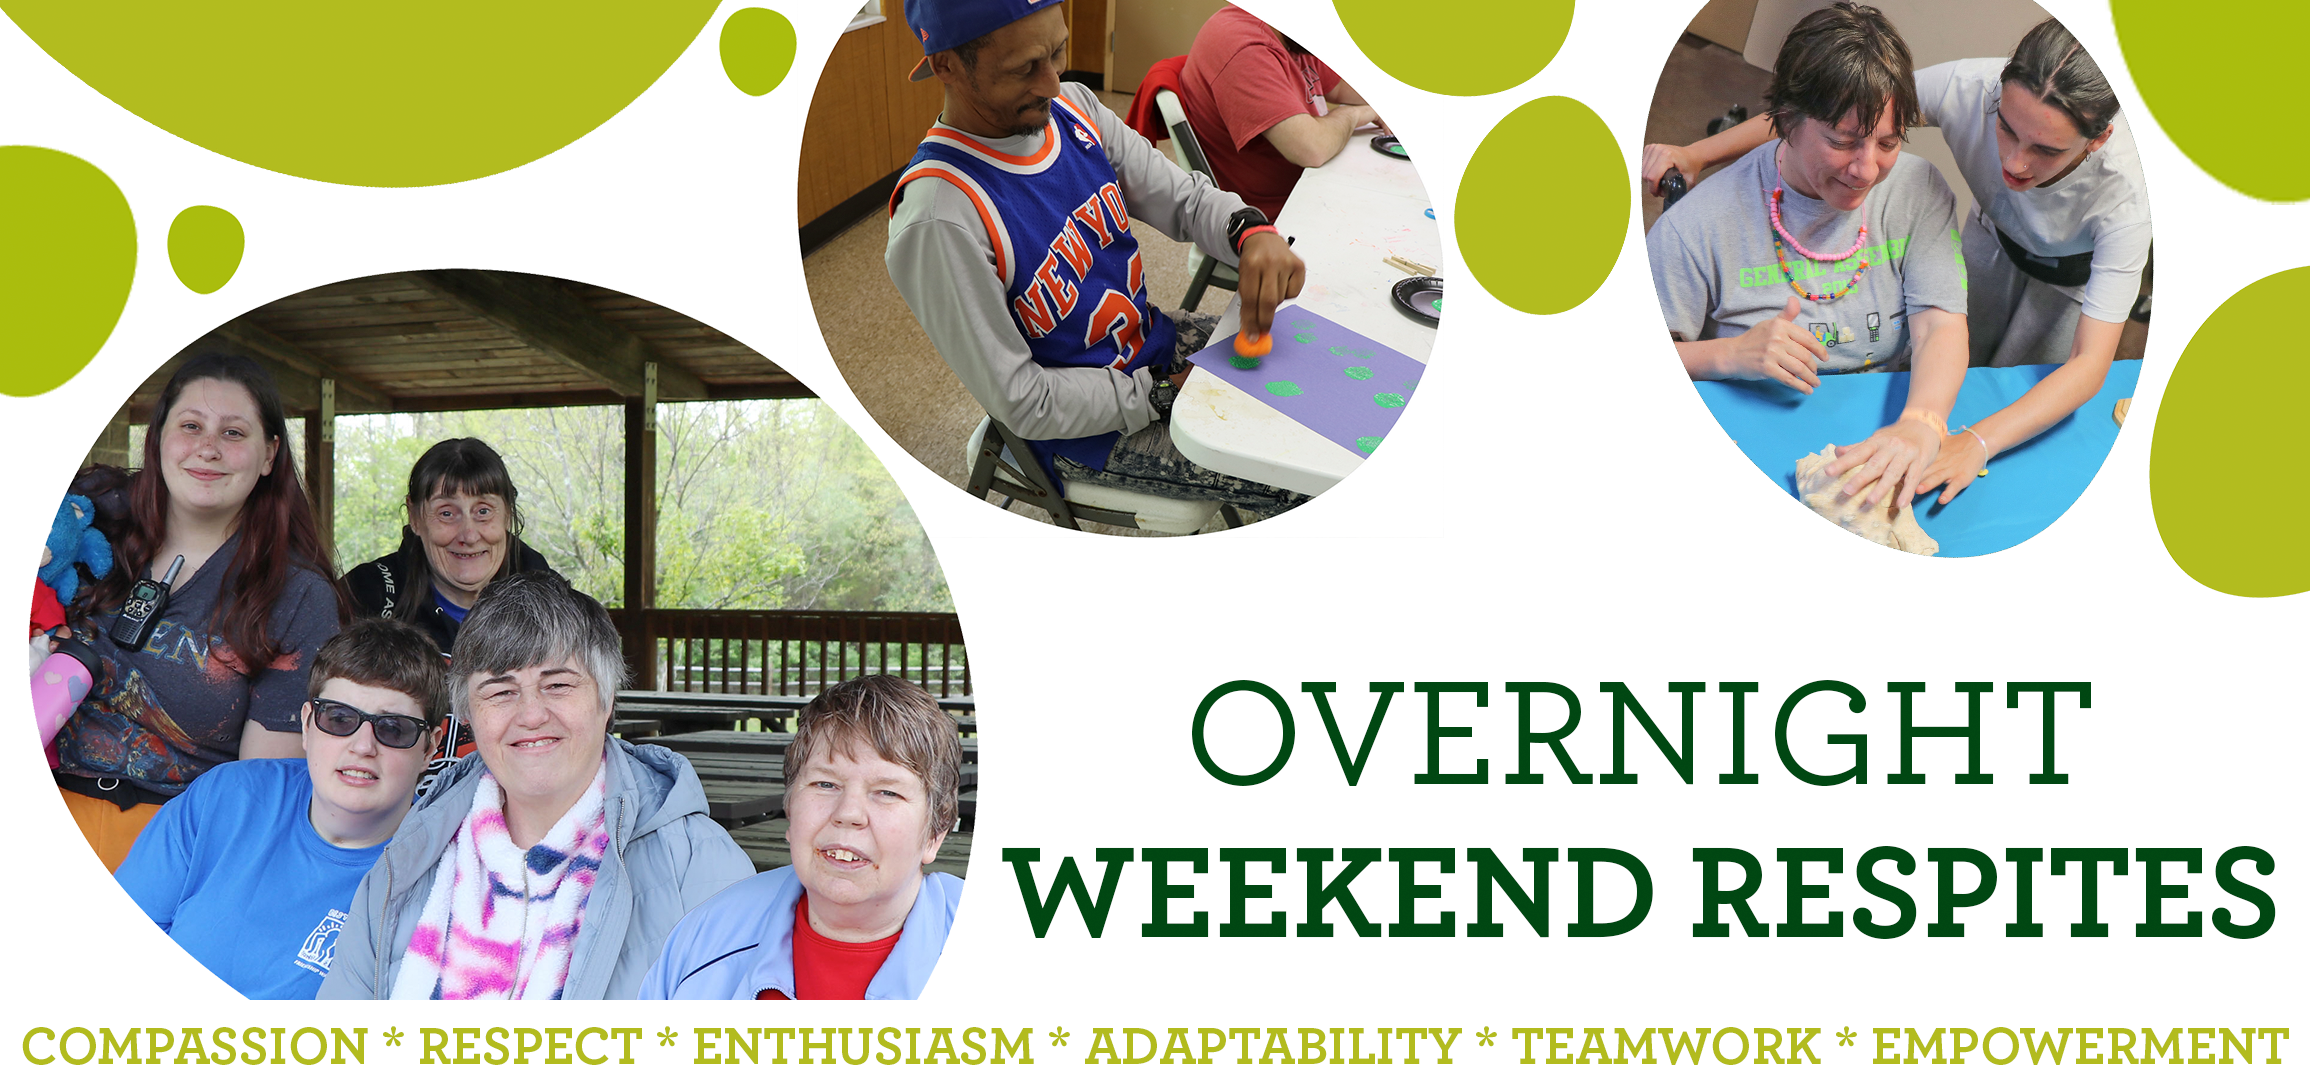 Overnight Weekend Respite Care for teens and adults with disabilities in Greater Cincinnati, Ohio